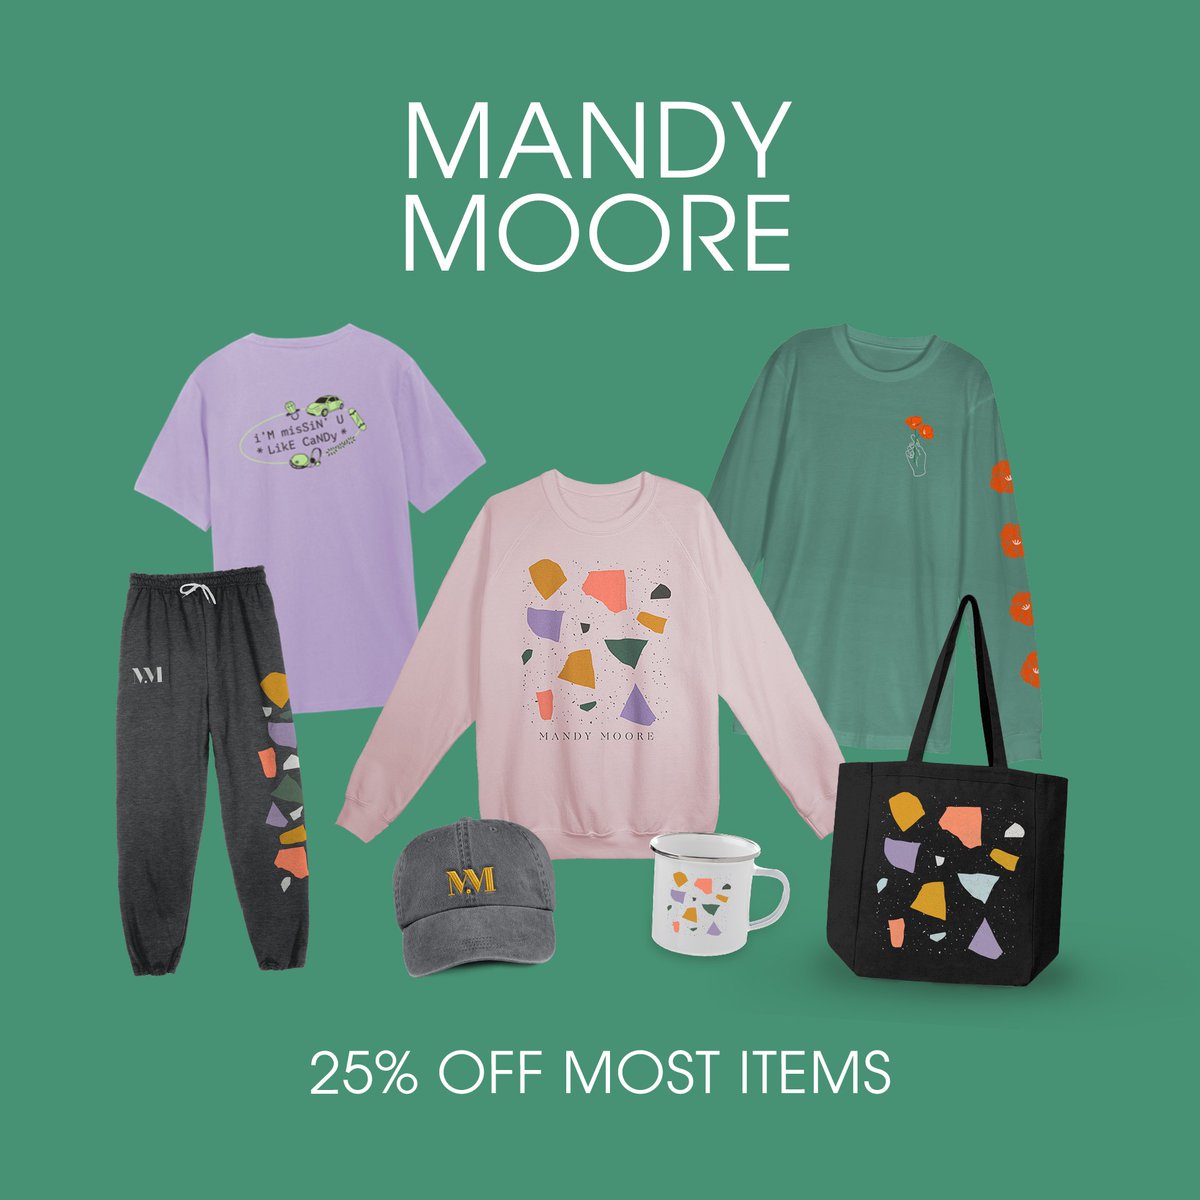 The Most Wonderful Sale Of The Year ends tonight with 25% off merch!
 